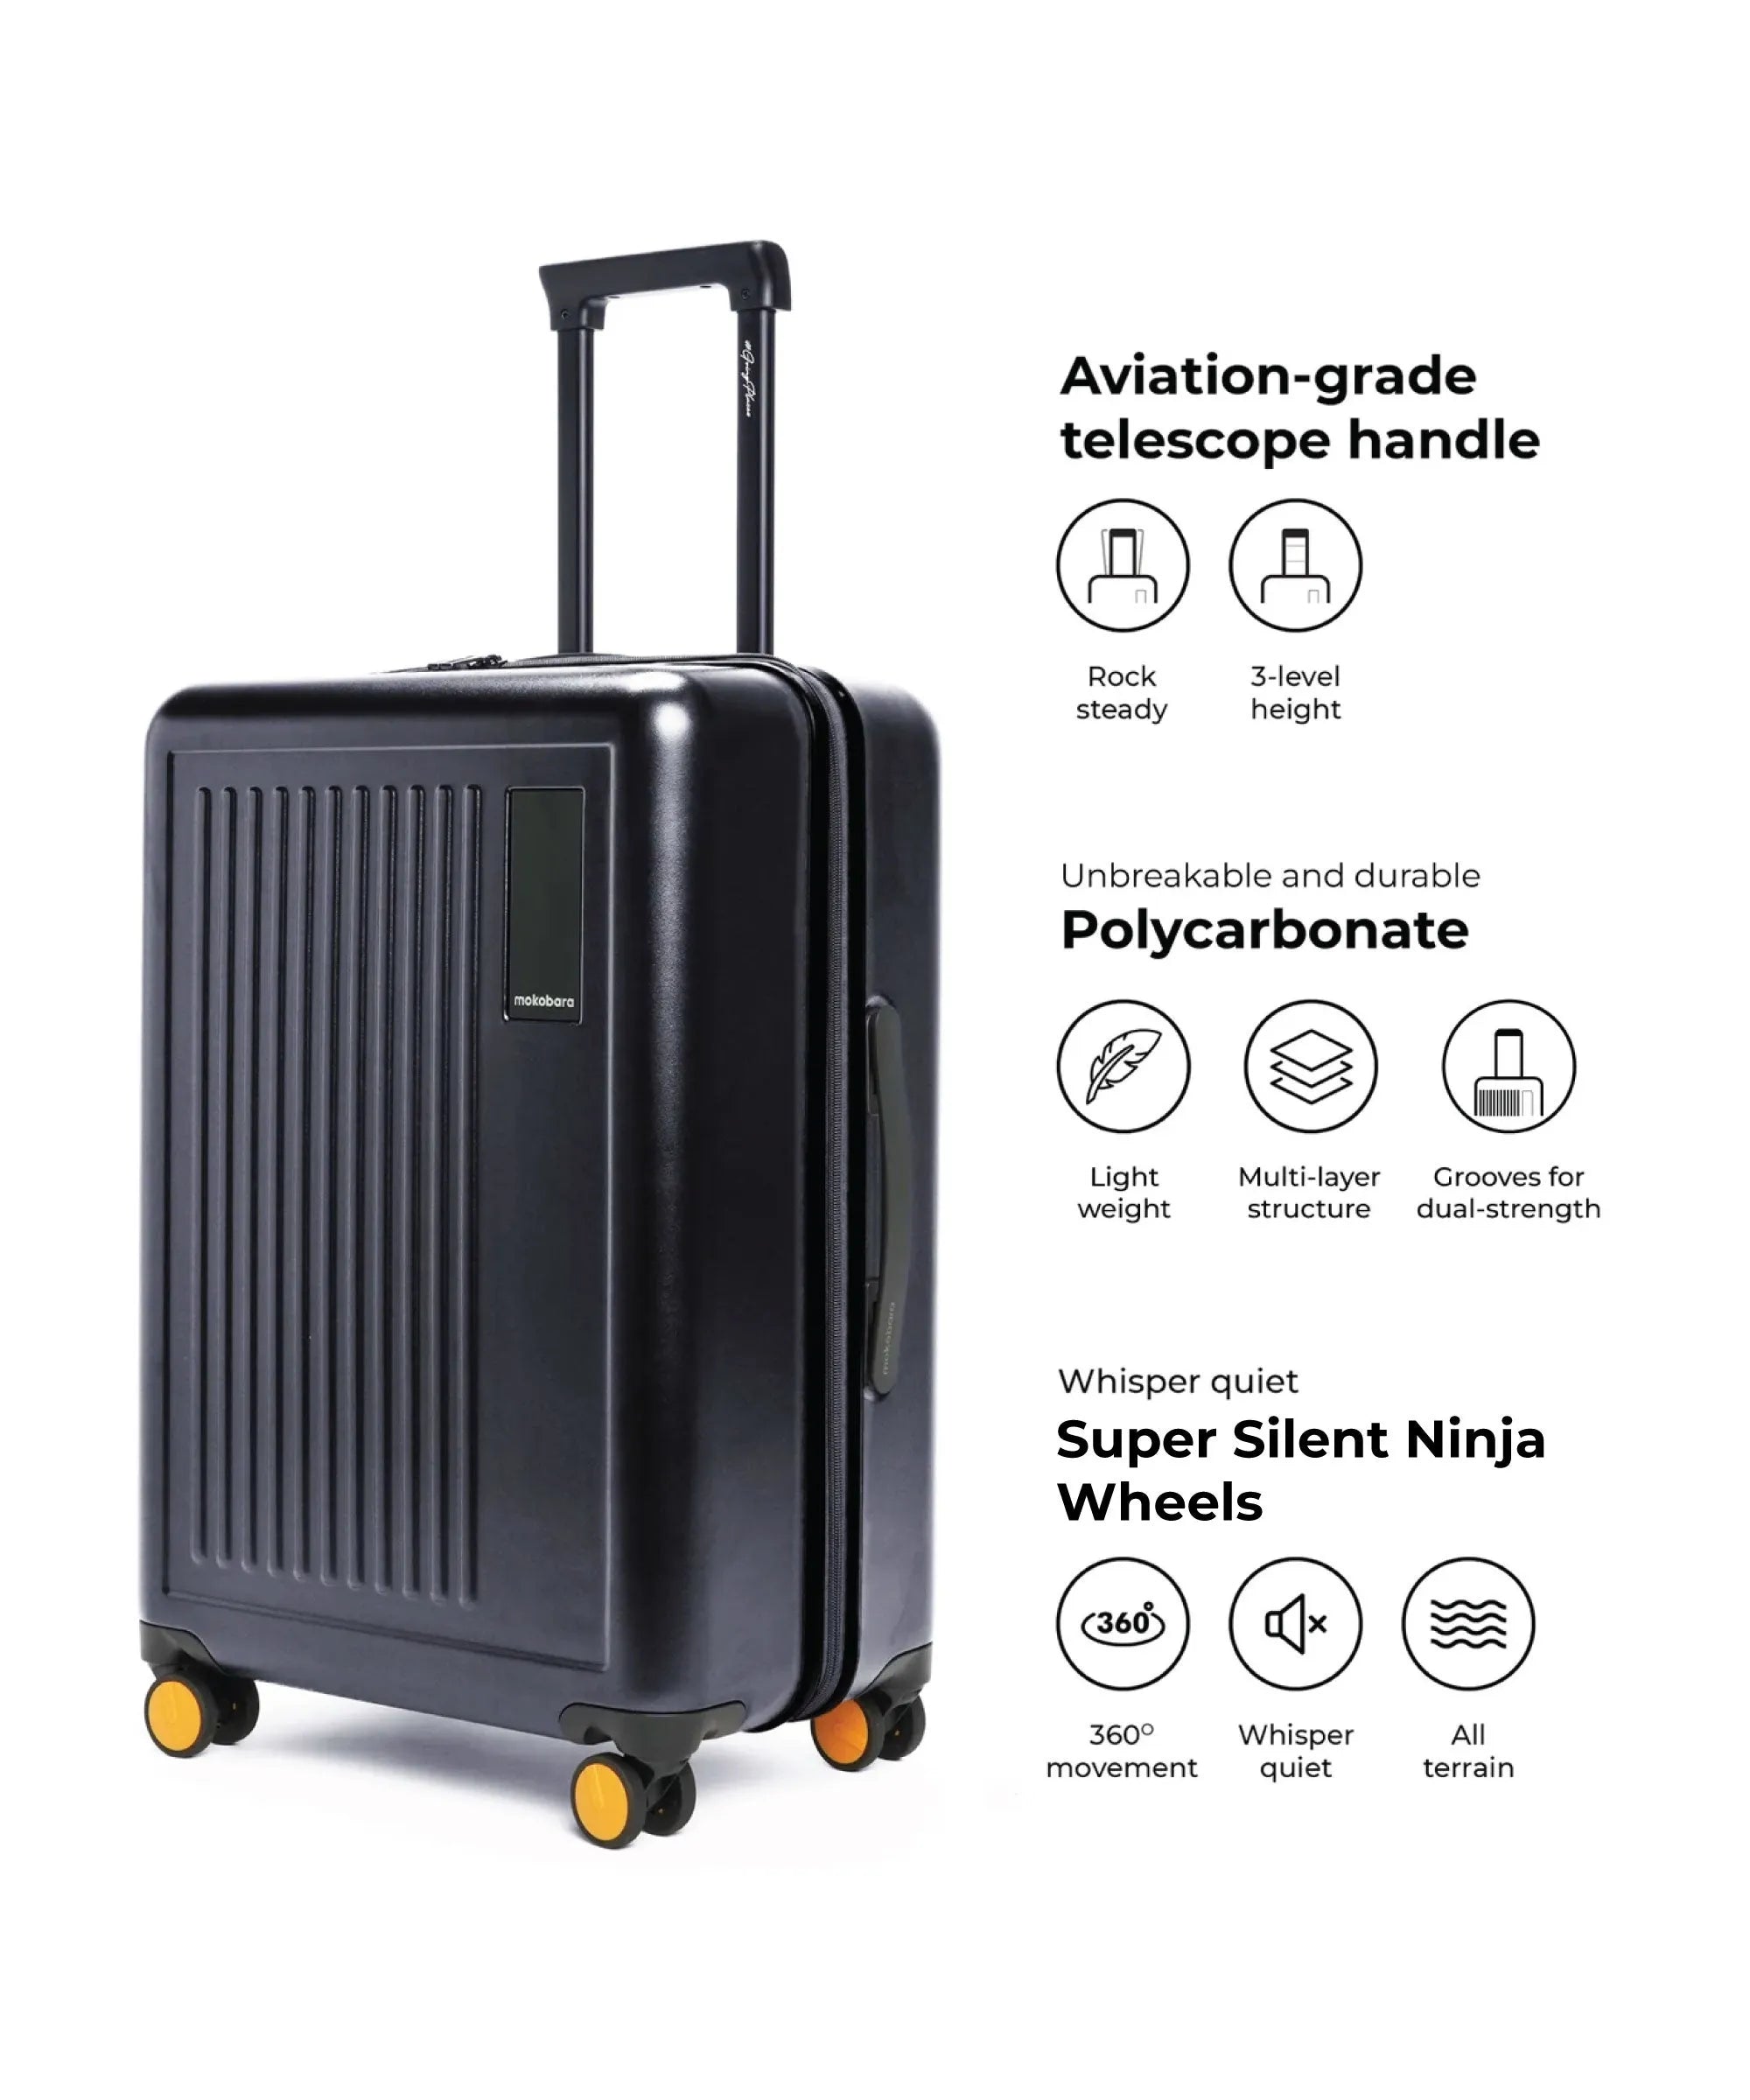 Color_Crypto | The Transit Luggage - Set of 2